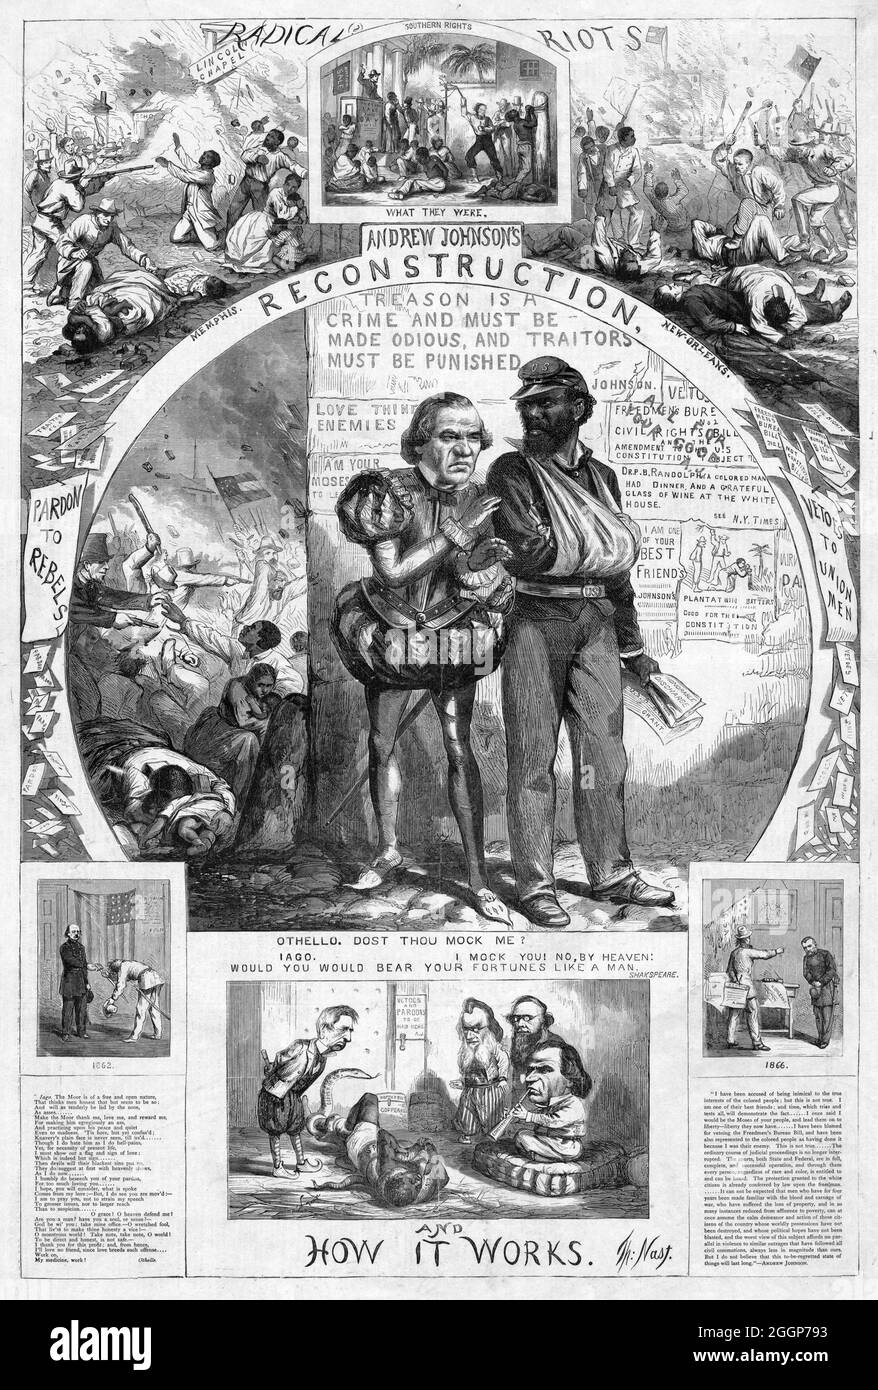 'Andrew Johnson's Reconstruction and How It Works,' a political cartoon by Thomas Nast (1840-1902) showing Andrew Johnson as the deceitful Iago who betrayed Othello, portrayed here as an African American Civil War veteran. Includes scenes of a slave auction, whites attacking blacks in Memphis and New Orleans, and 'Copperhead' and 'C.S.A.' snakes wrapped around a black man while Andrew Johnson and others watch. Harper's Weekly, September 1, 1866. Stock Photo